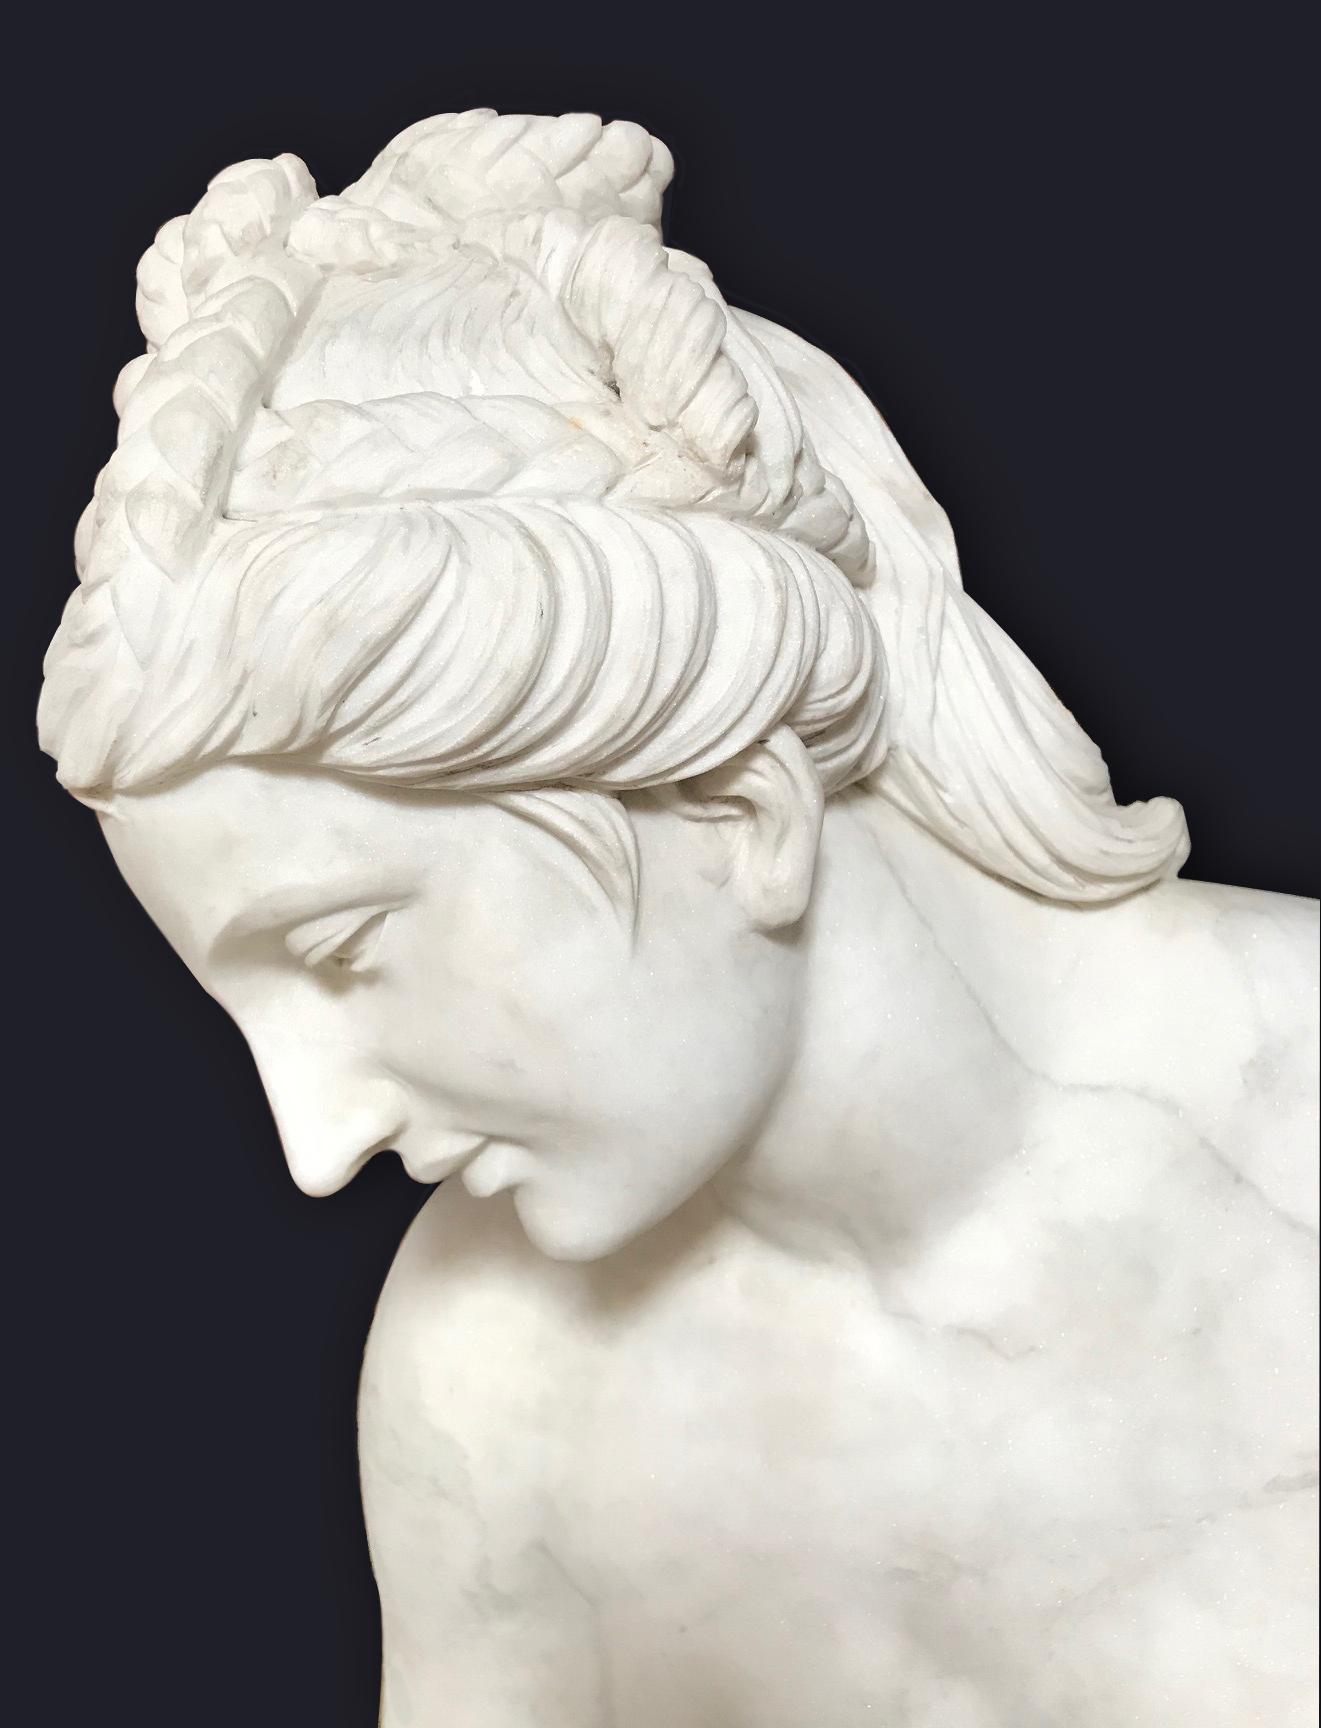 Neoclassical Marble Statue of Nude Diana after Bath, Life Size